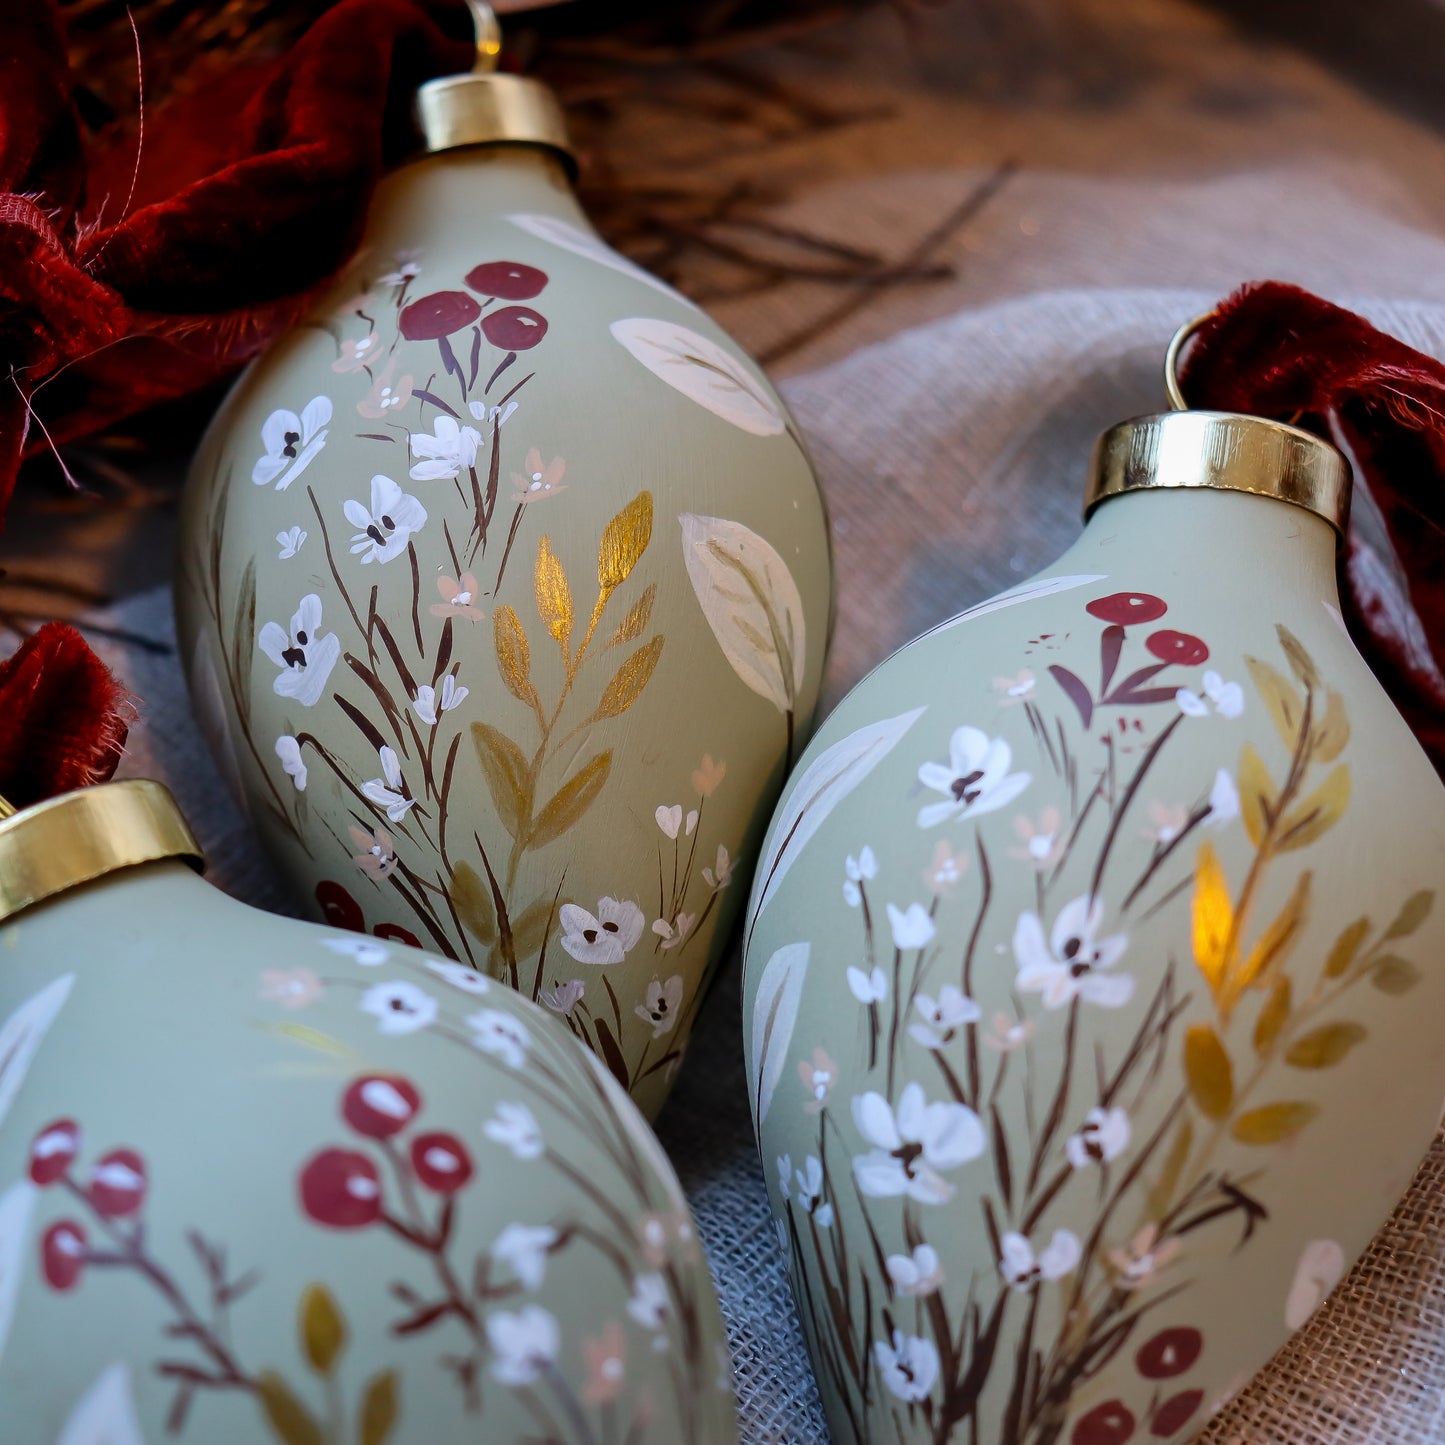 Botanicals in Sage Icicle Shaped Ceramic Ornament